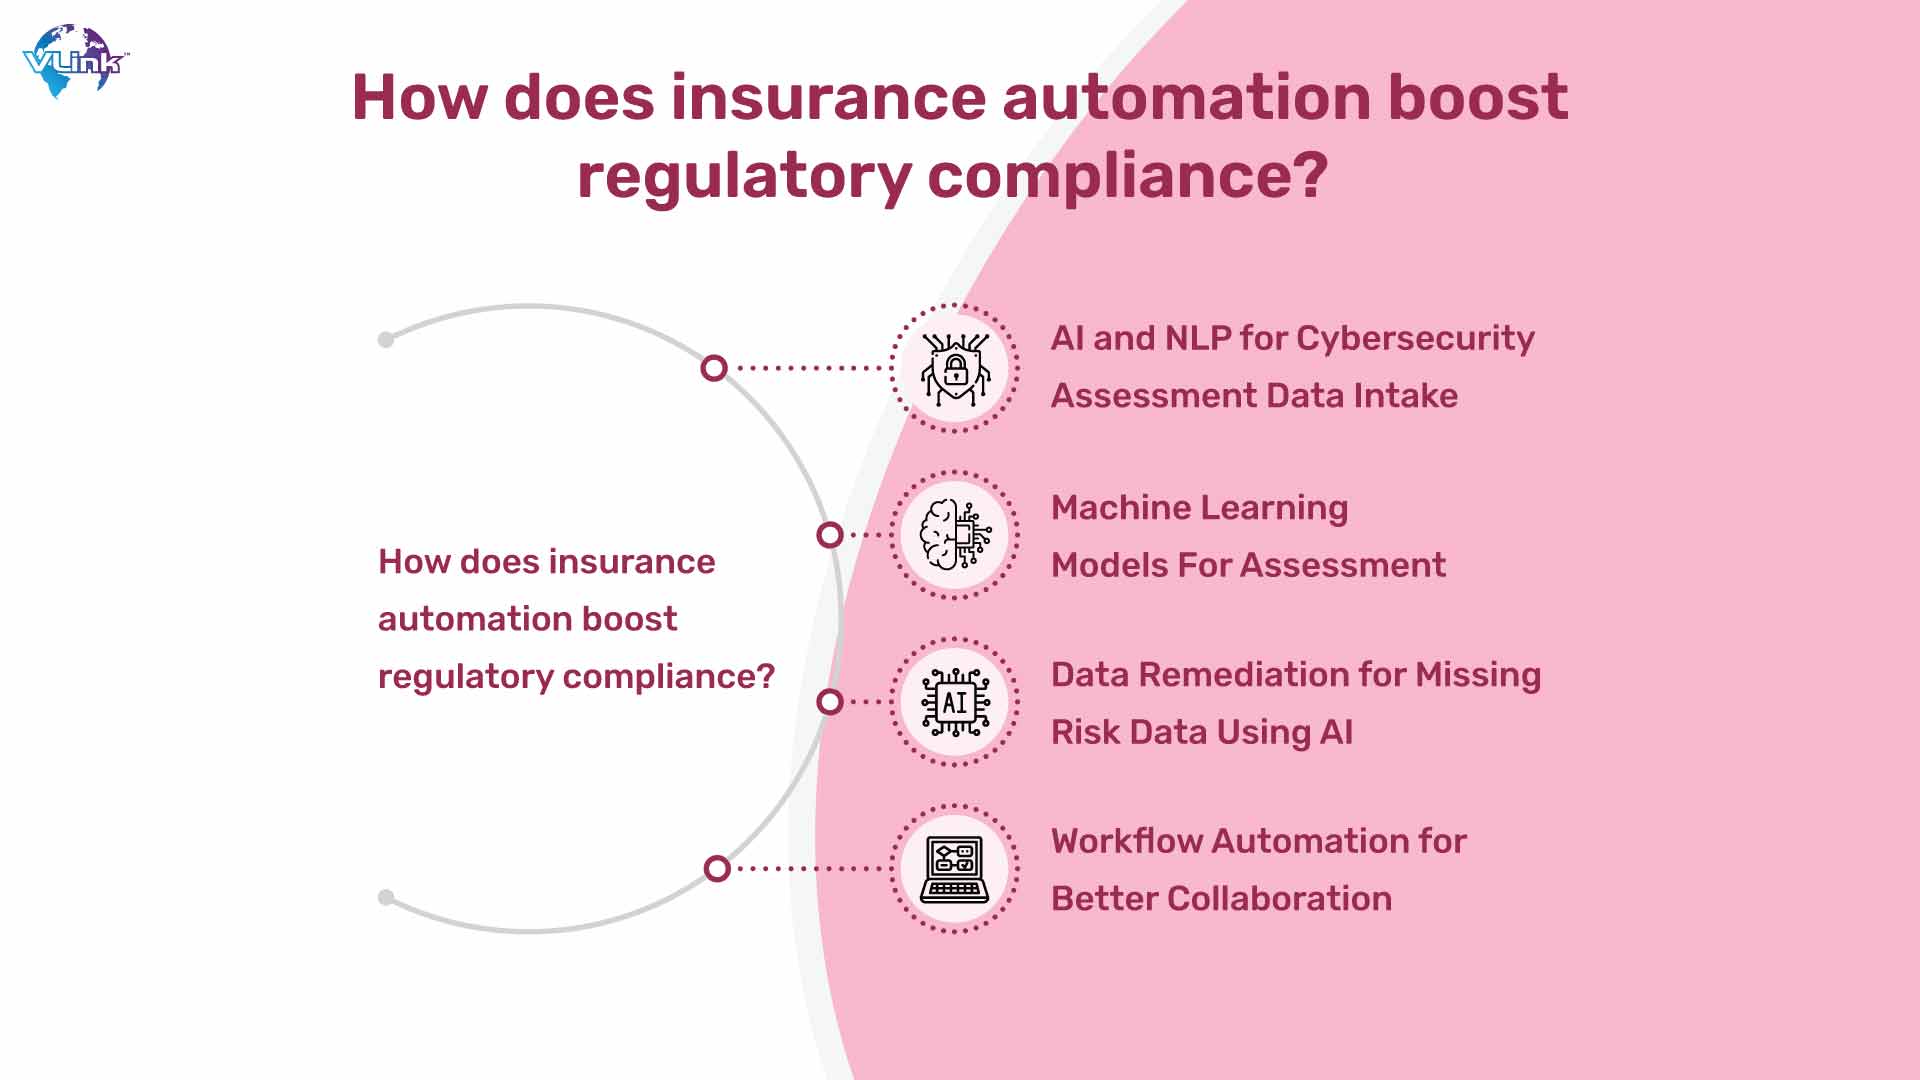 How Does insurance automation boost regulatory compliance